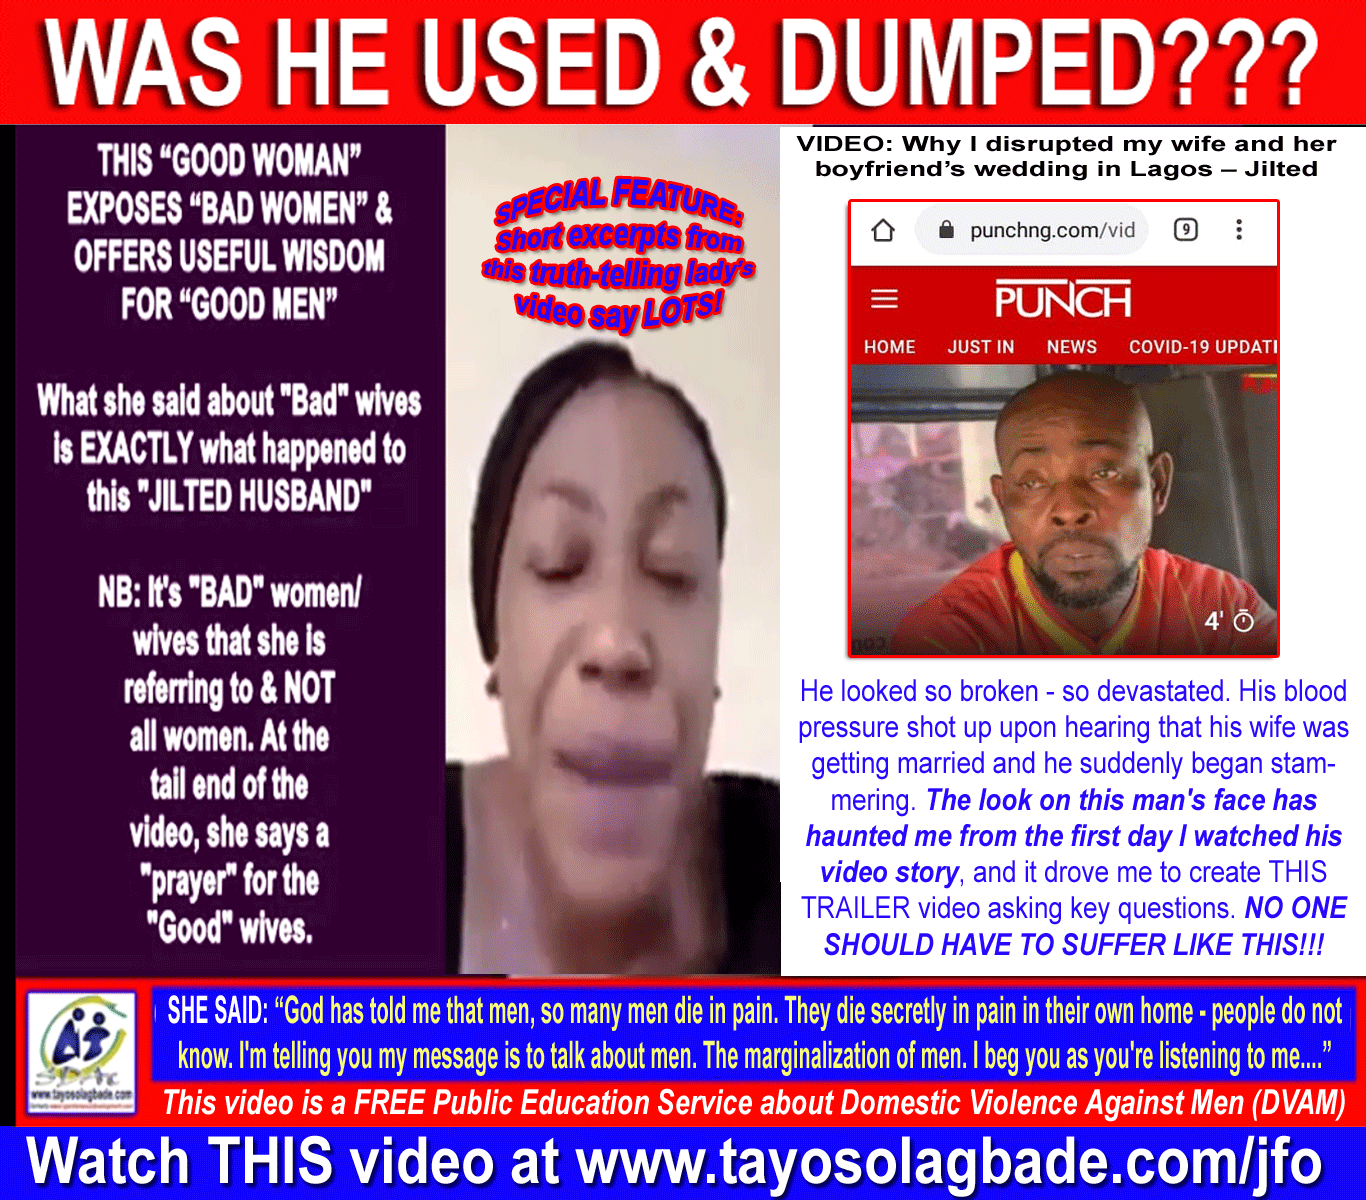 [SDVAM] Was He Used & Dumped? (Man Whose Wife Weds Boyfriend, Now Stutters With High Blood Pressure)